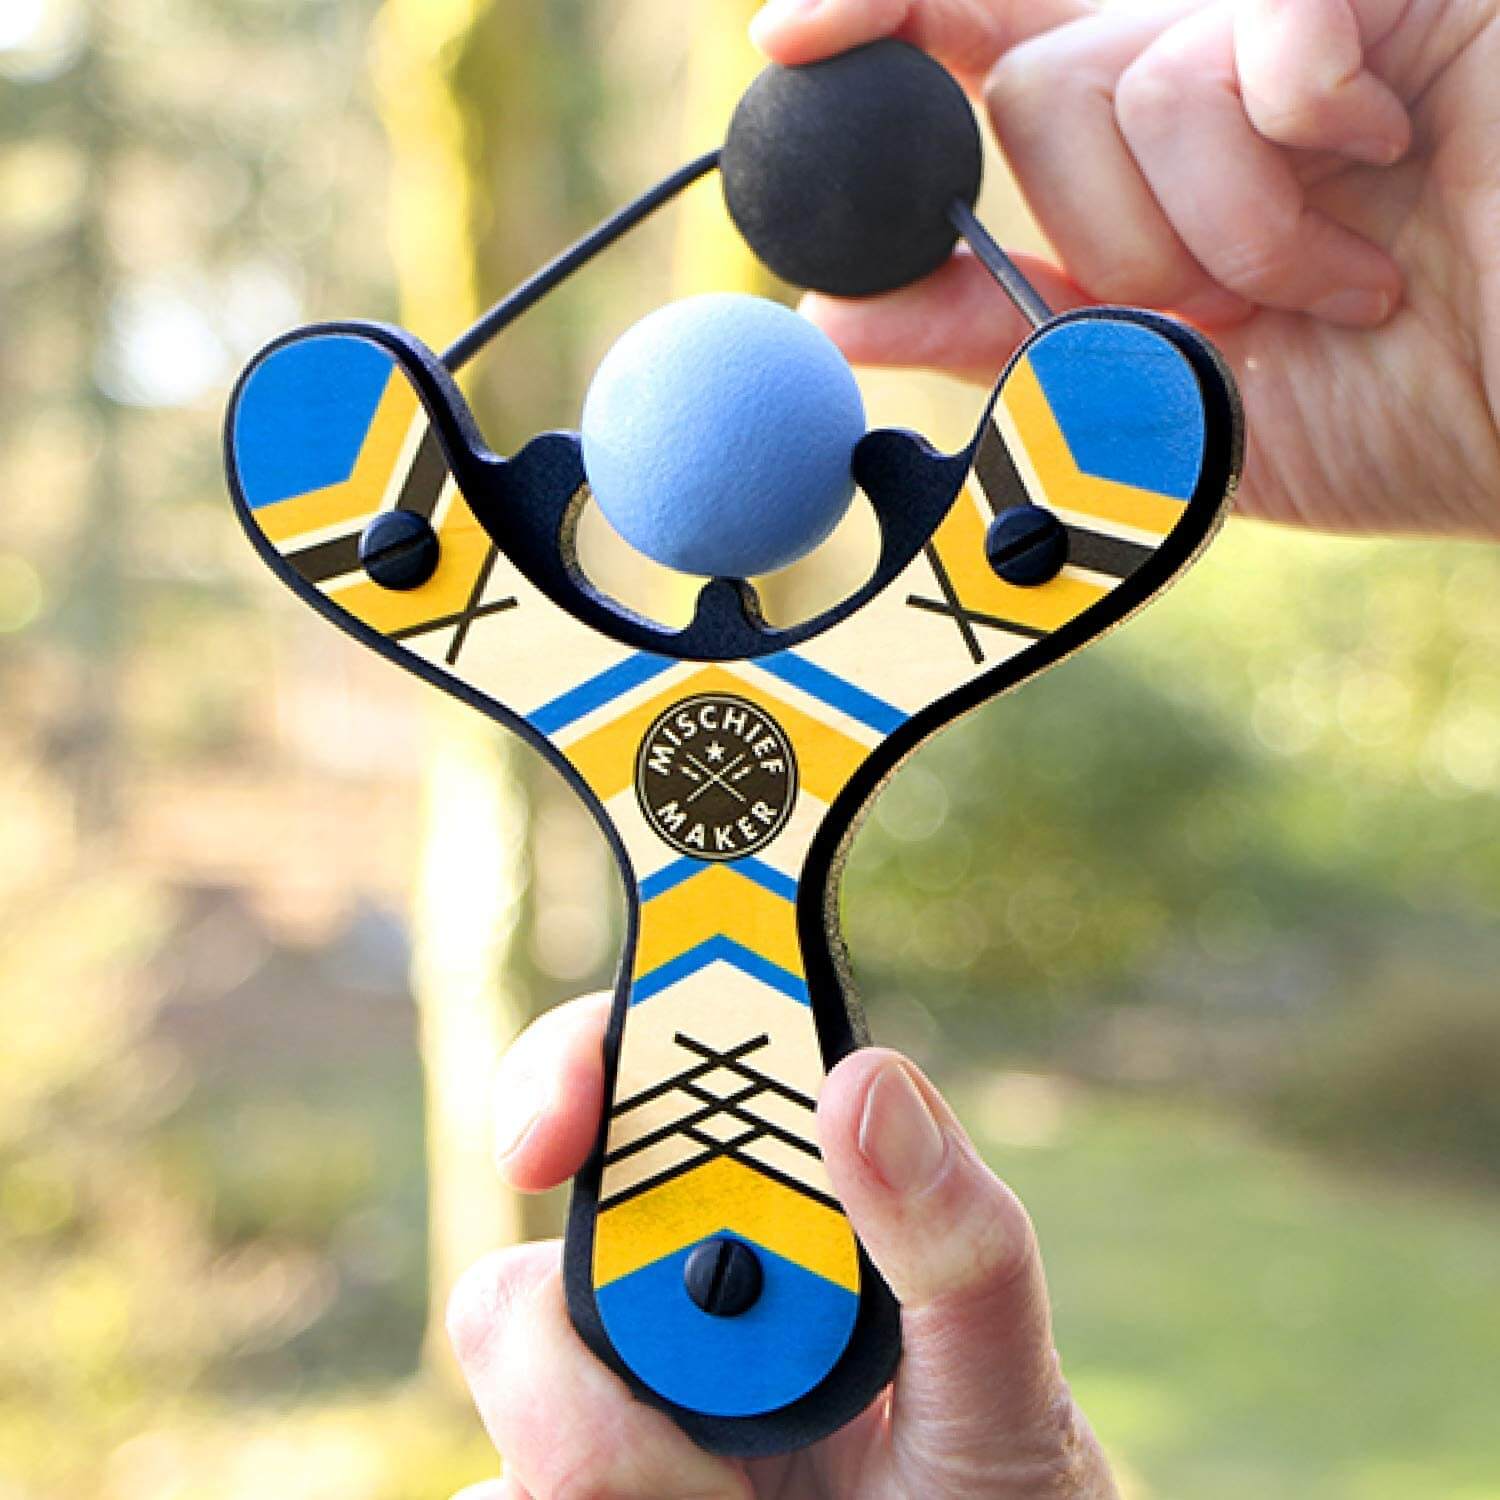 Mighty Fun Mischief Maker Blue Slingshot with 4 Balls